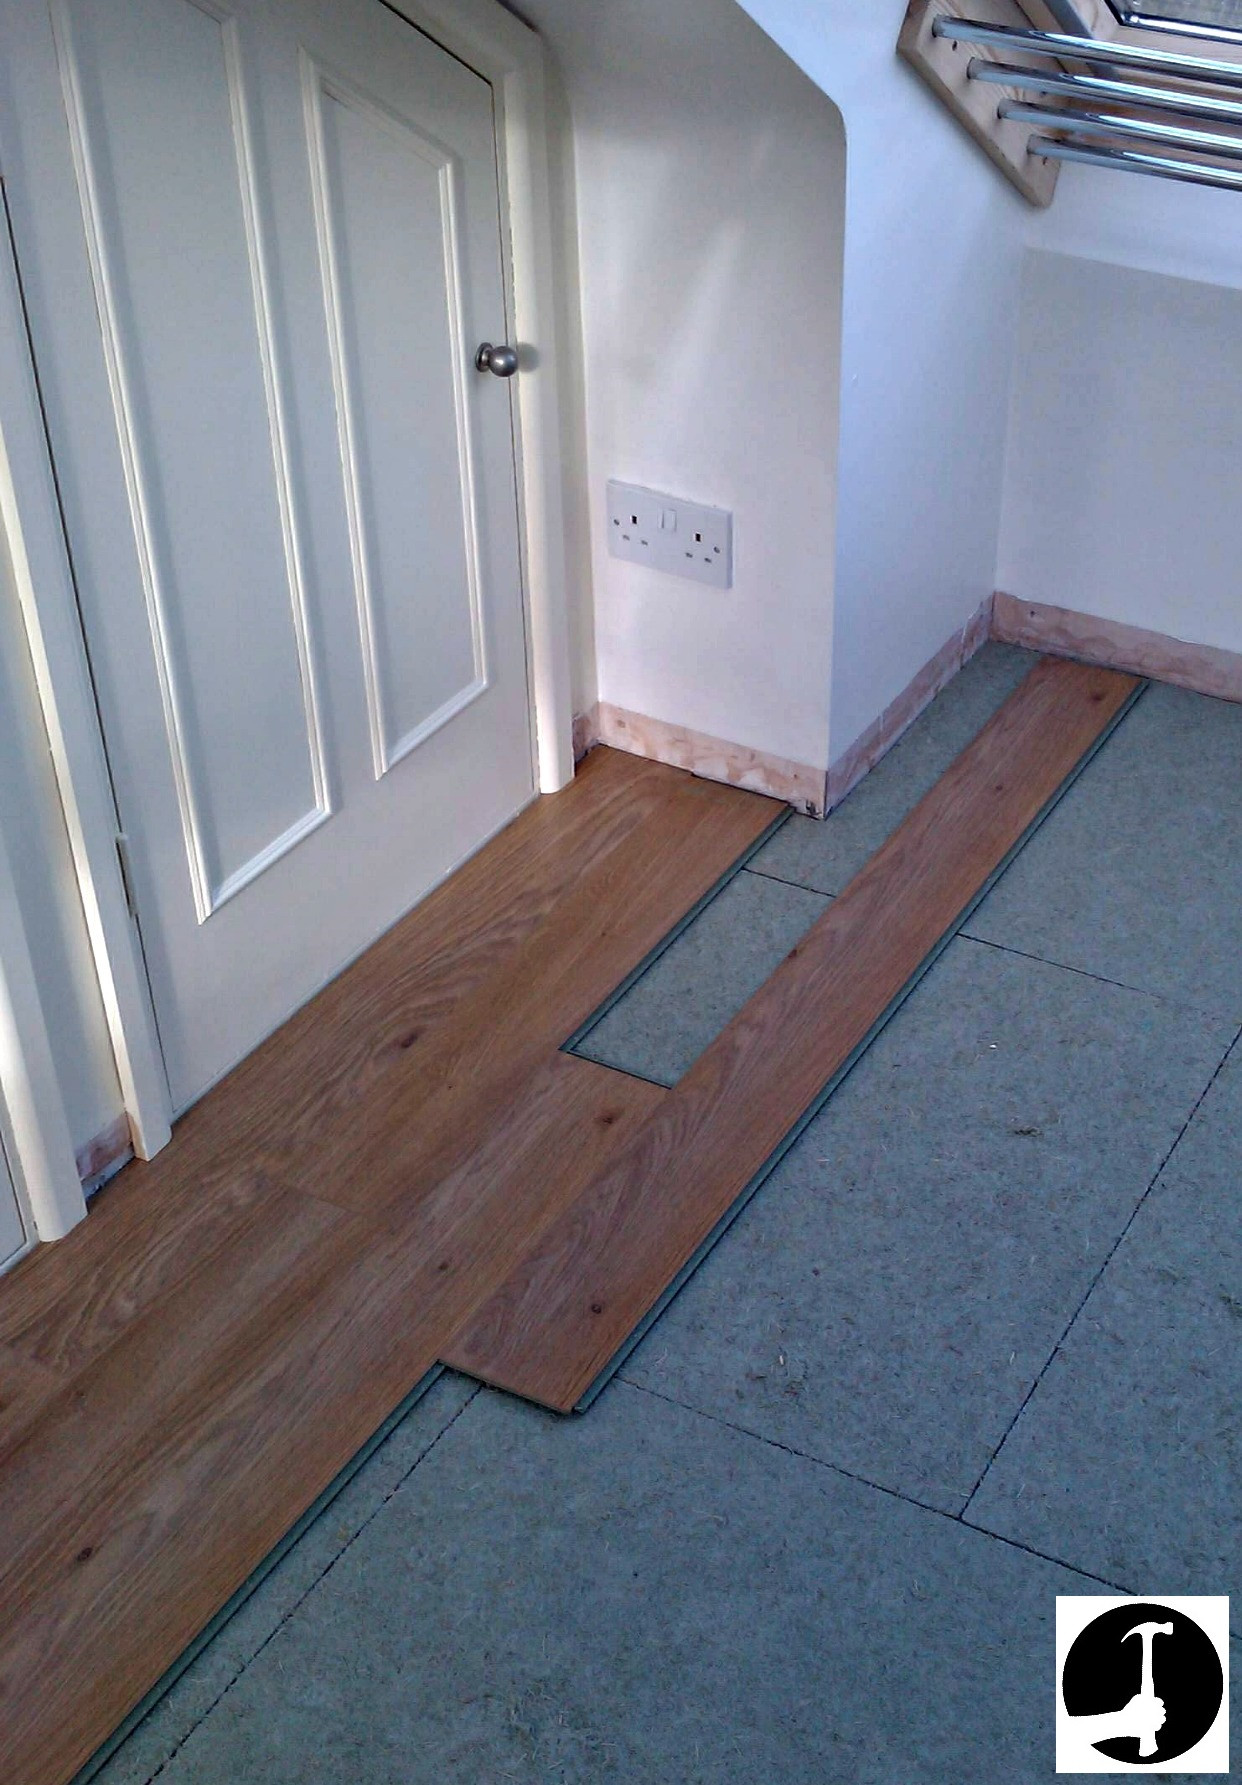 how to install a hardwood floor yourself of how to install laminate flooring with ease glued glue less systems in setting out laminate flooring